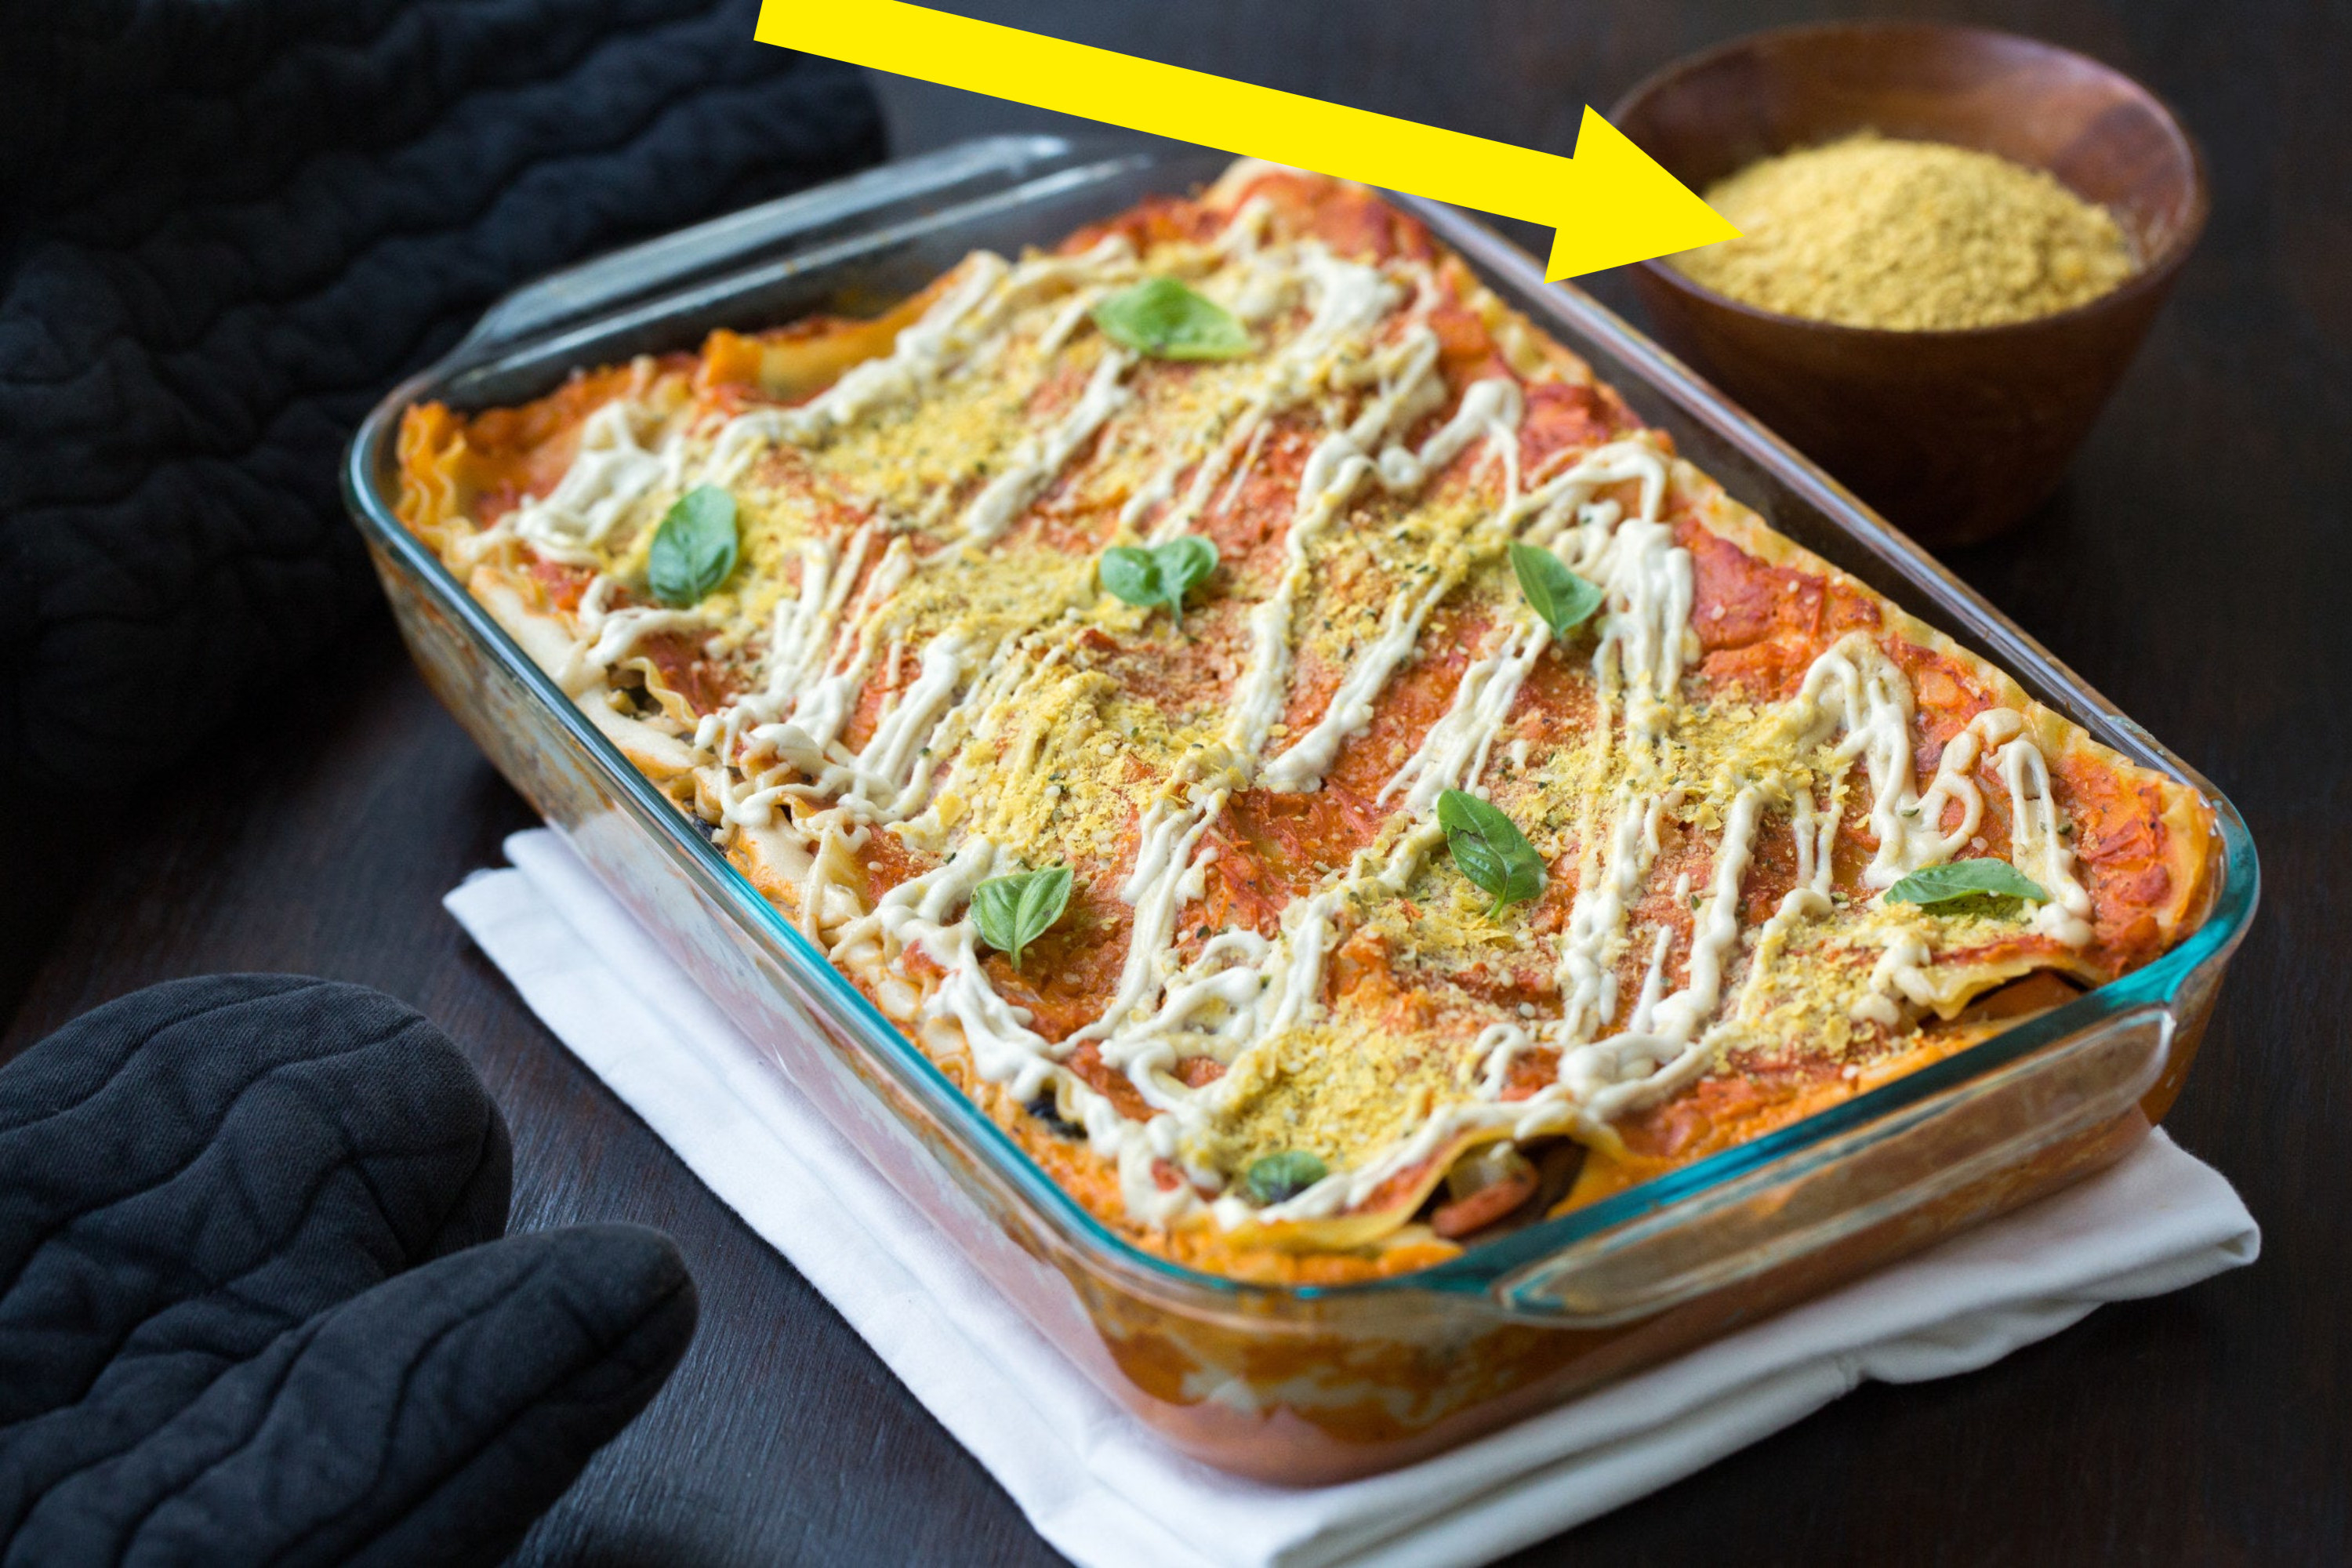 A lasagna topped with nutritional yeast.